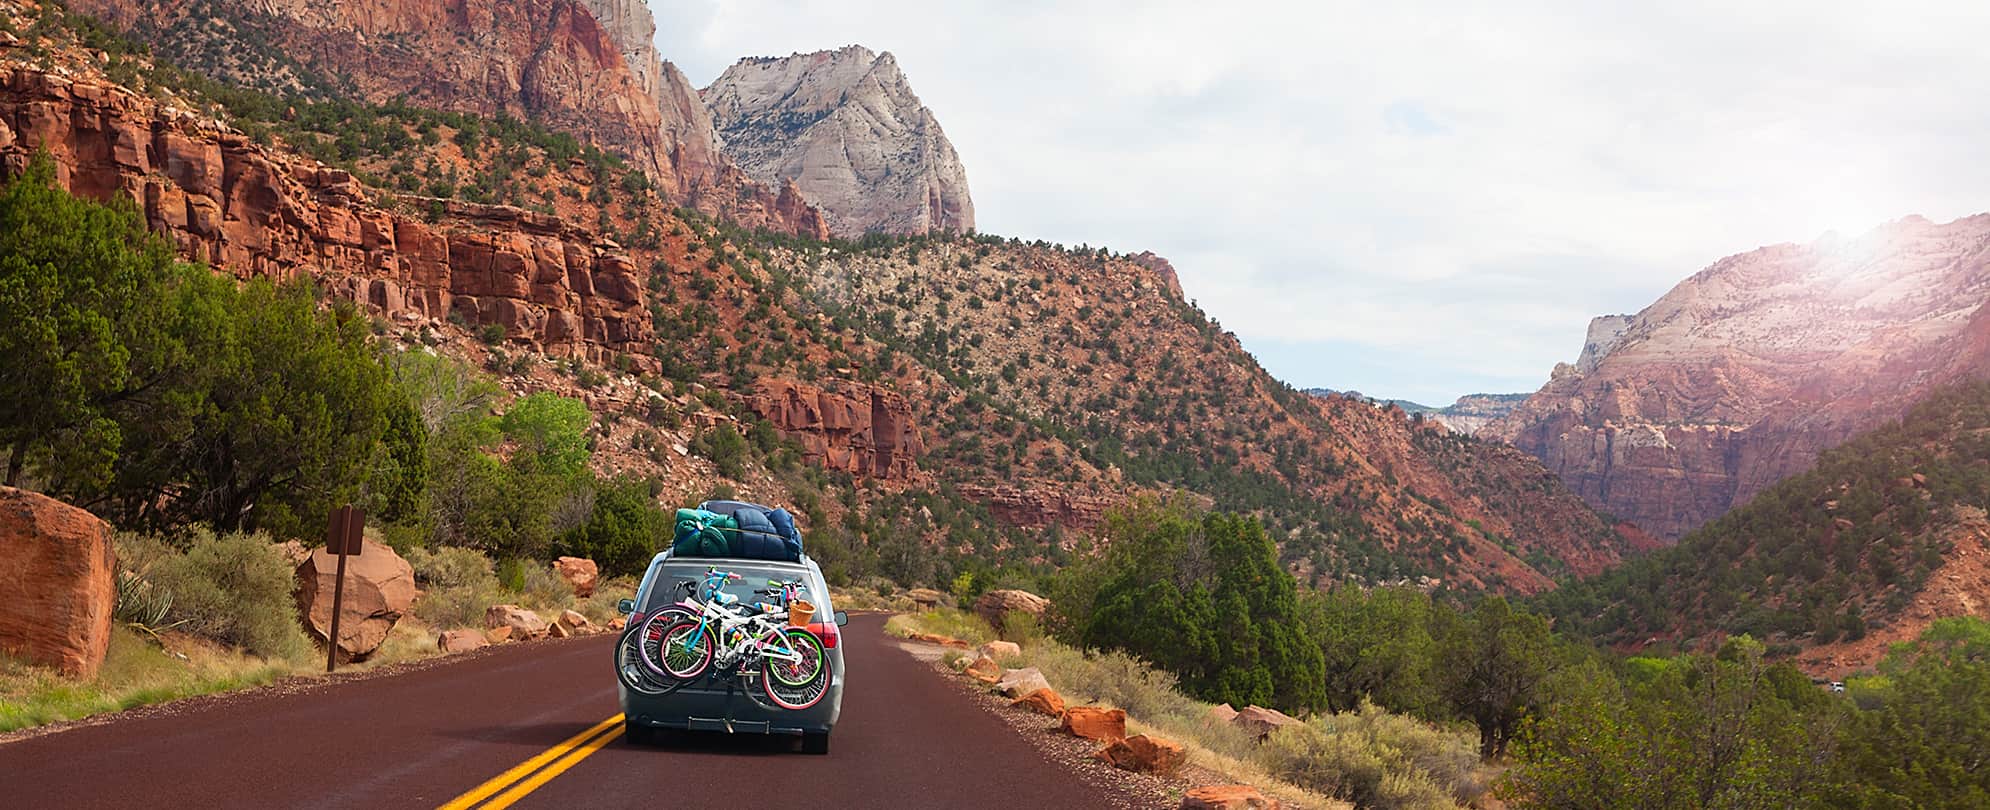 A car with bicycles attached to the back drives through Zion National Park near Las Vegas.